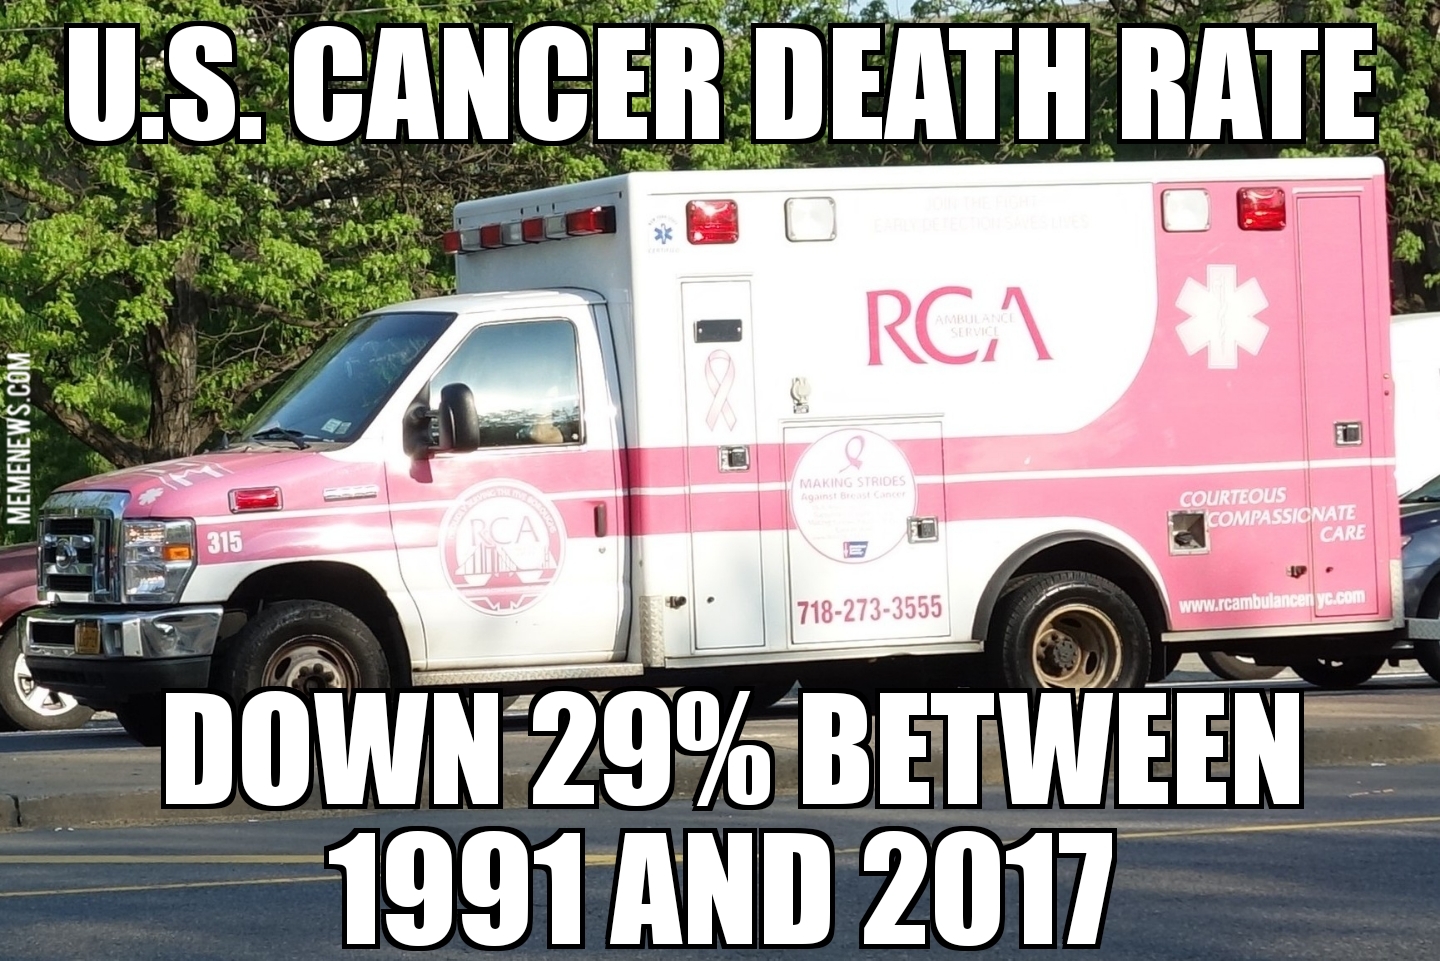 U.S. cancer death rate down